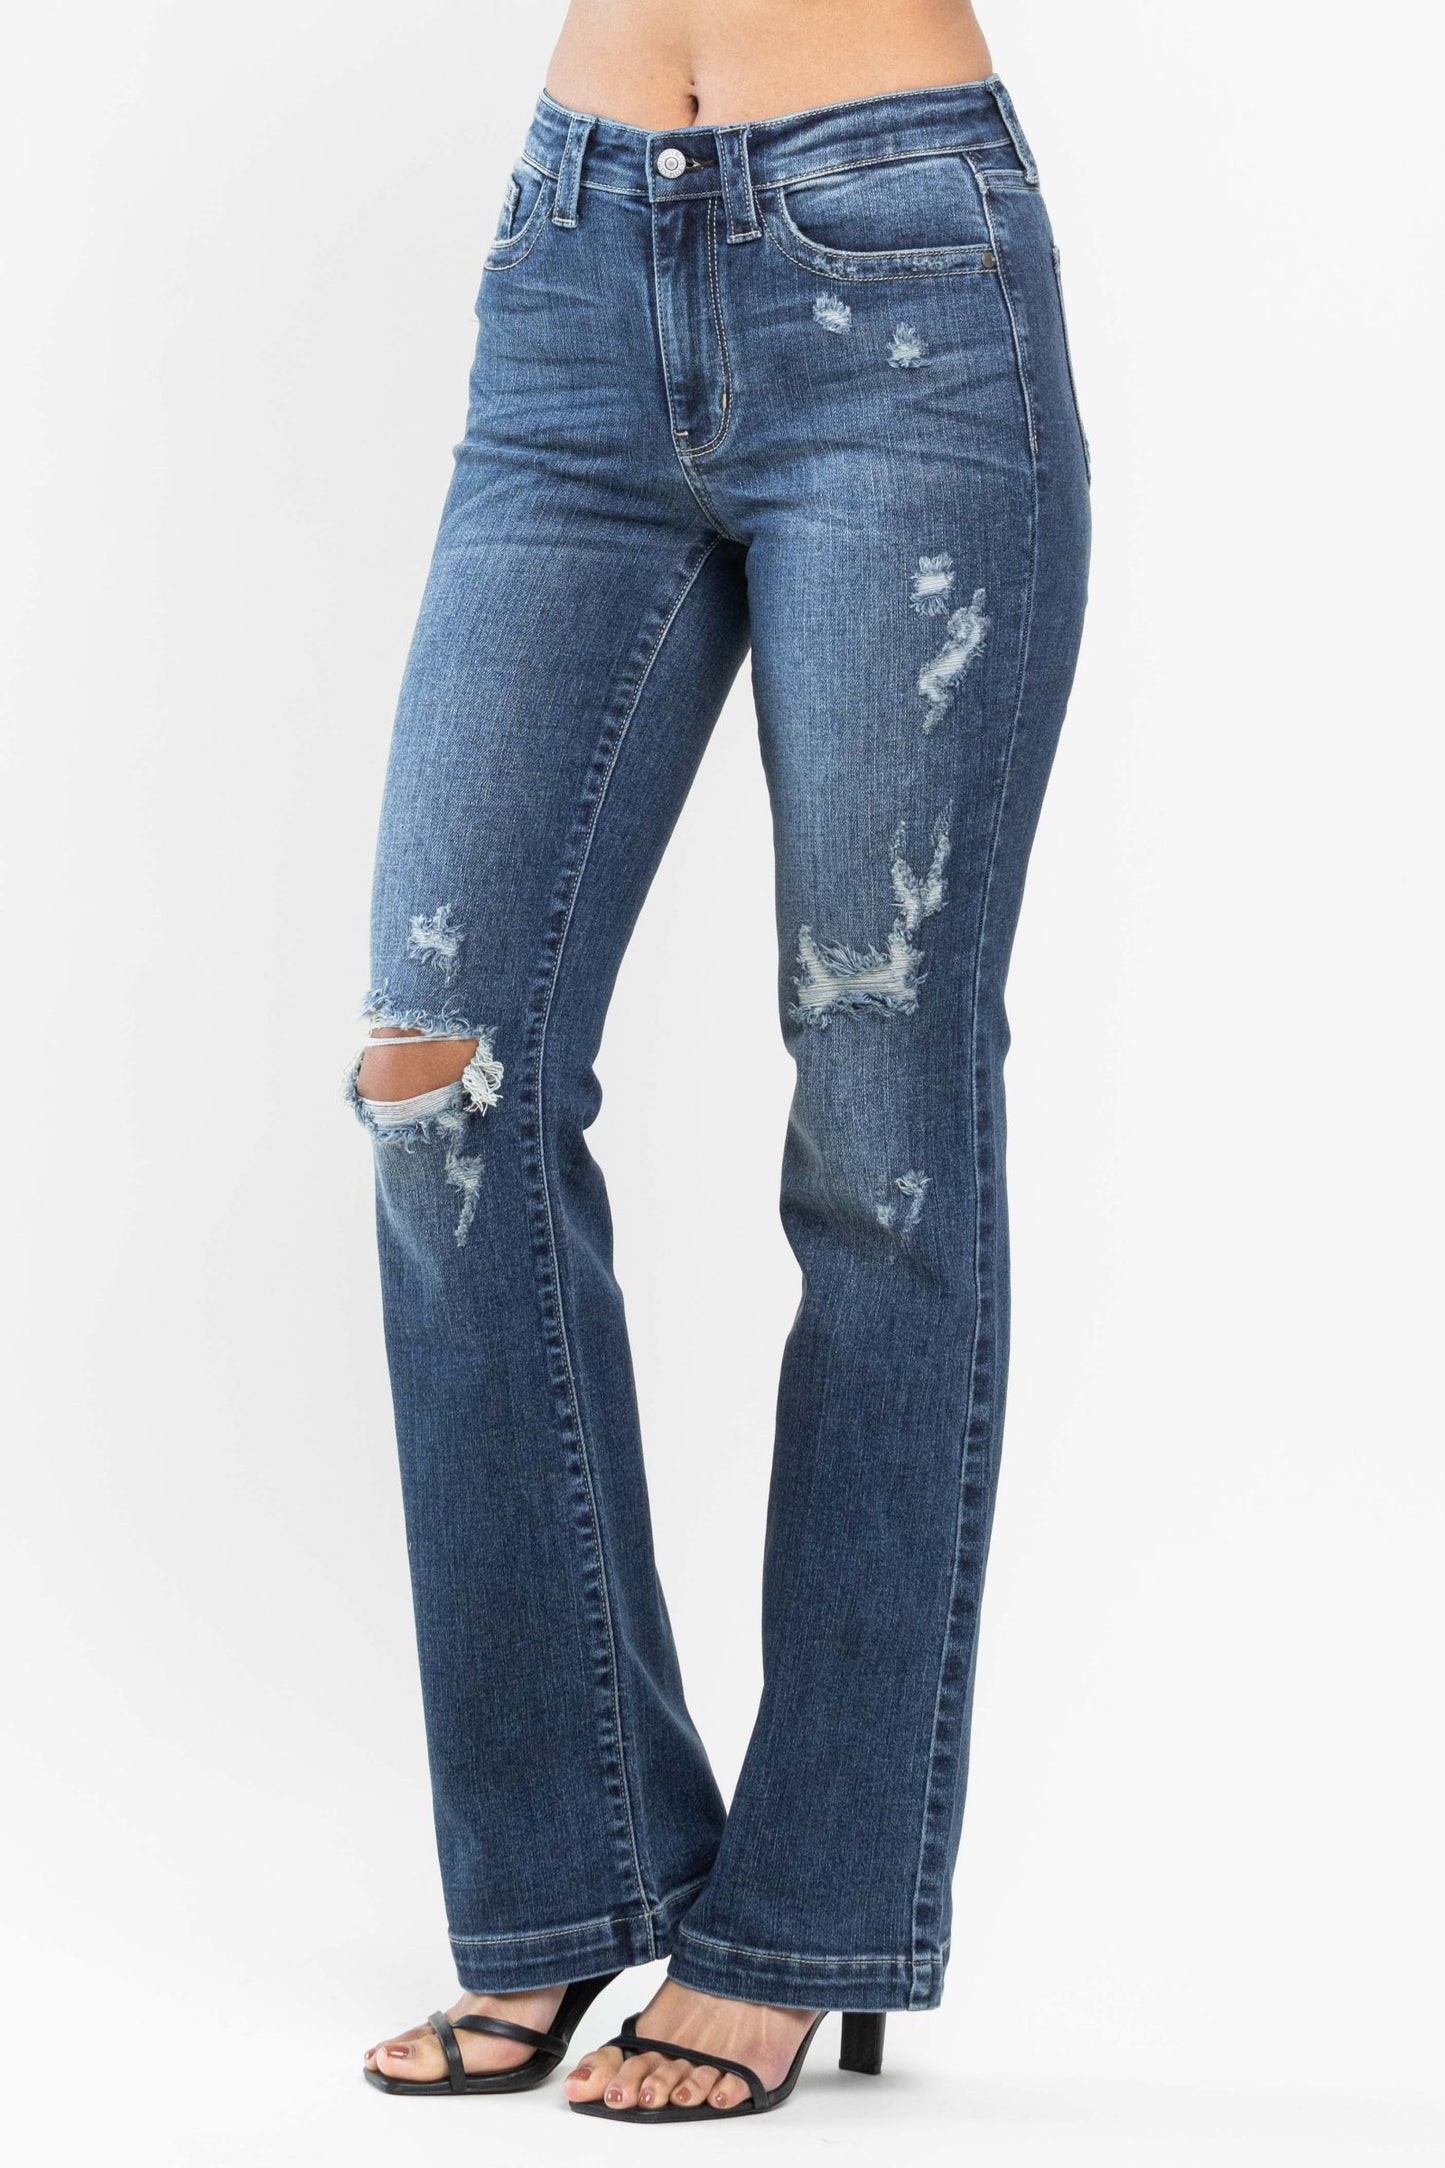 SIZE 5/27 Judy Blue Cameron Mid-Rise Distressed Bootcut Jeans (JB 82541)